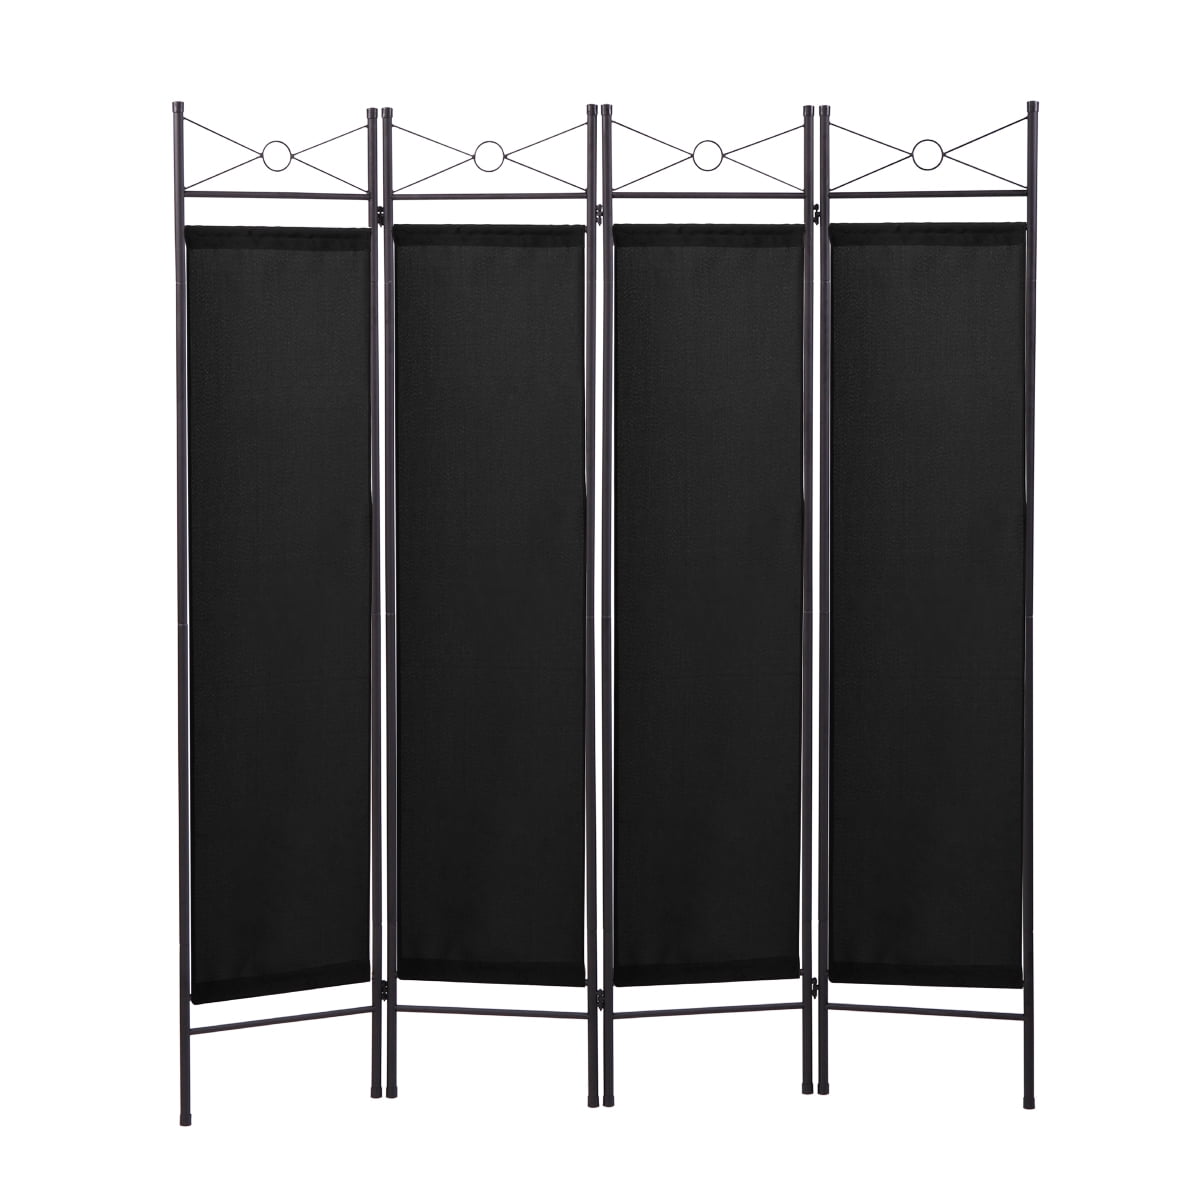 Hand Made Partition Folding Room Divider Separator Privacy Screen Black 5 Panel 